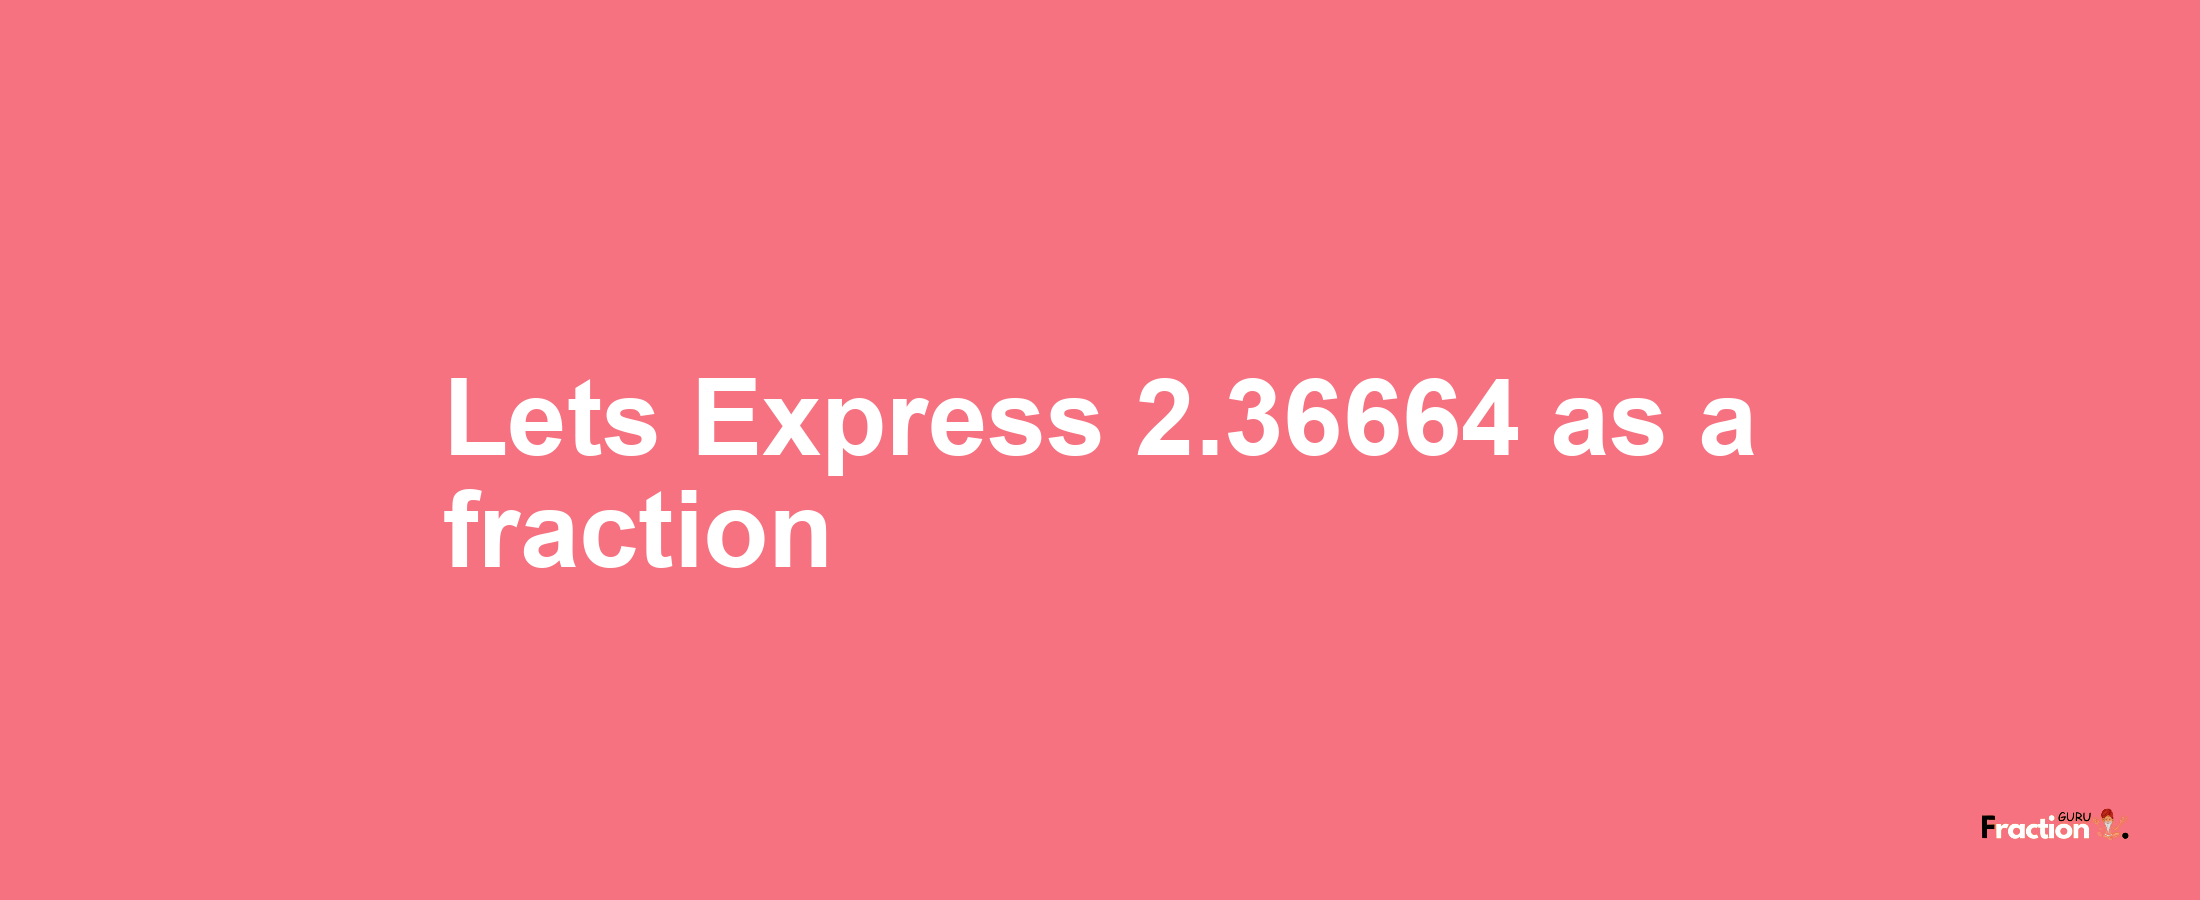 Lets Express 2.36664 as afraction